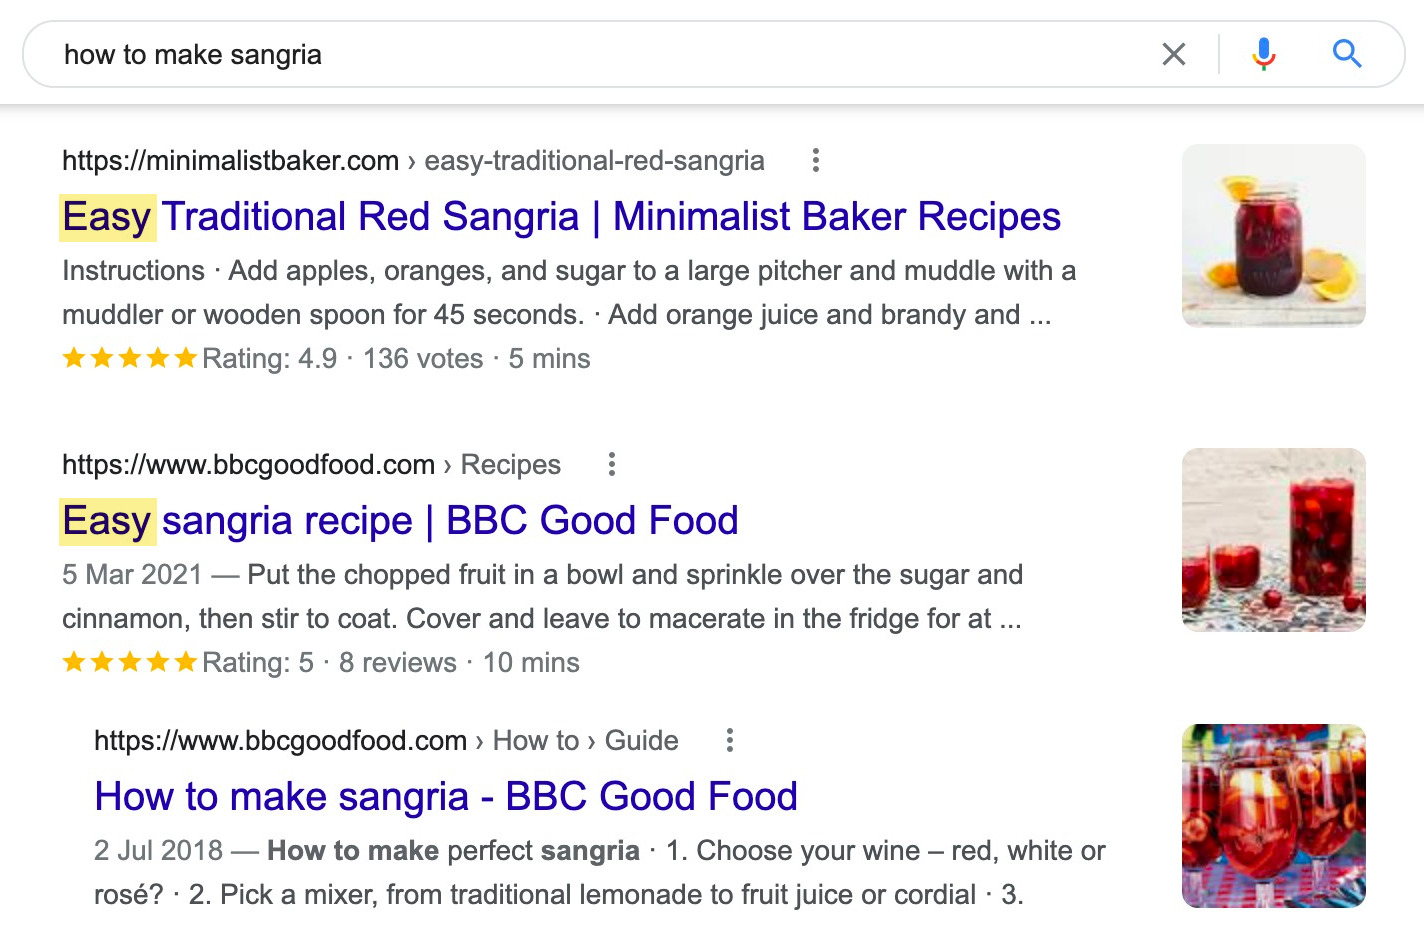 'Easy' content angle - search intent